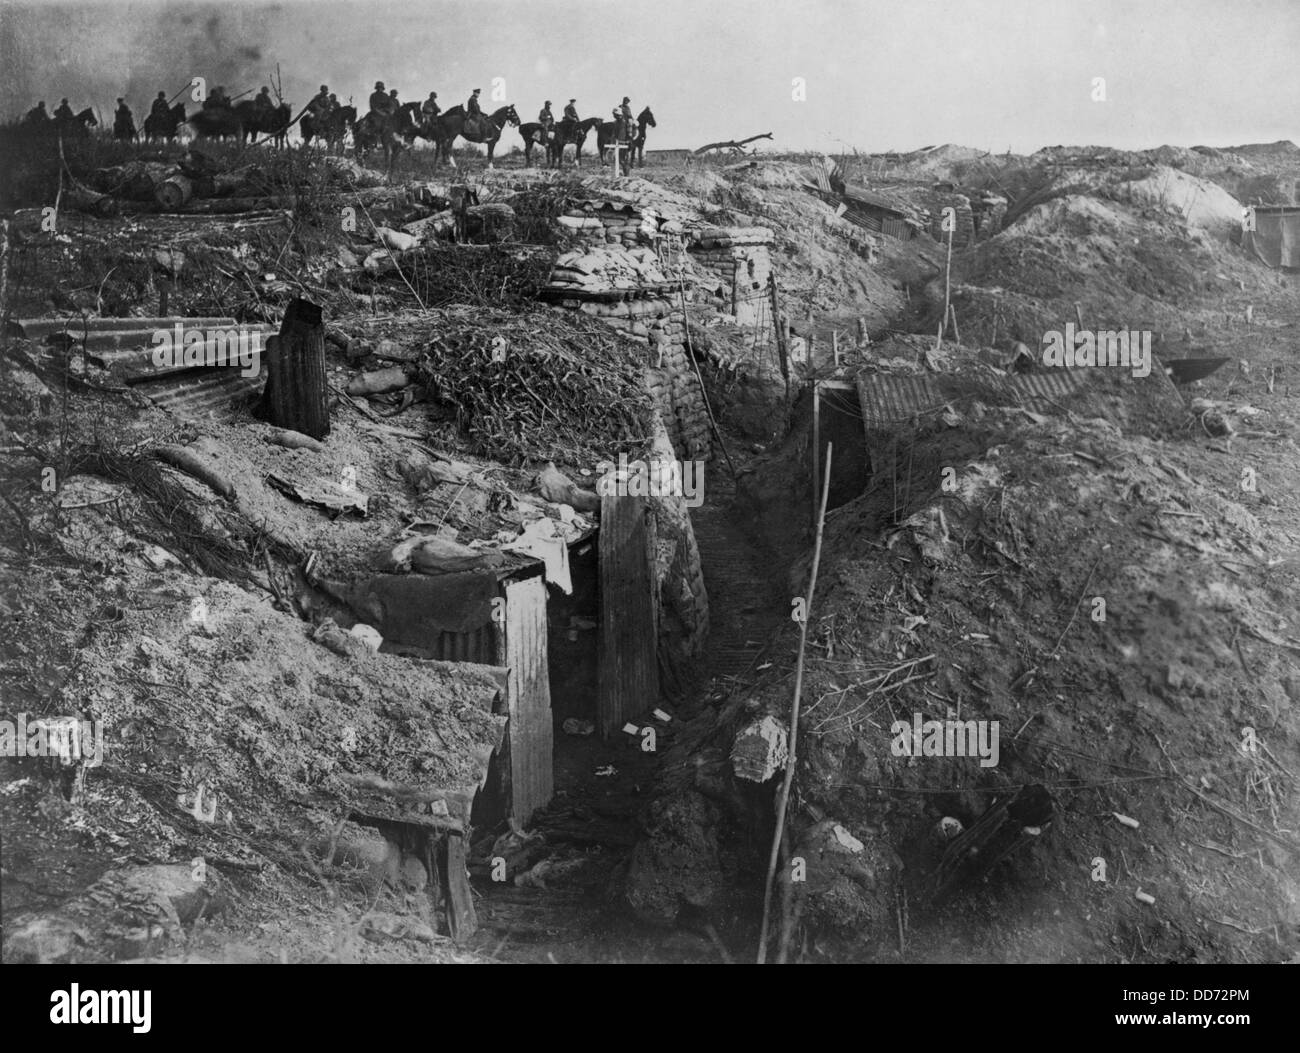 World War 1. Abandoned British trench which was captured by the Germans, who are on horseback in the background. Ca. 1915-18. Stock Photo